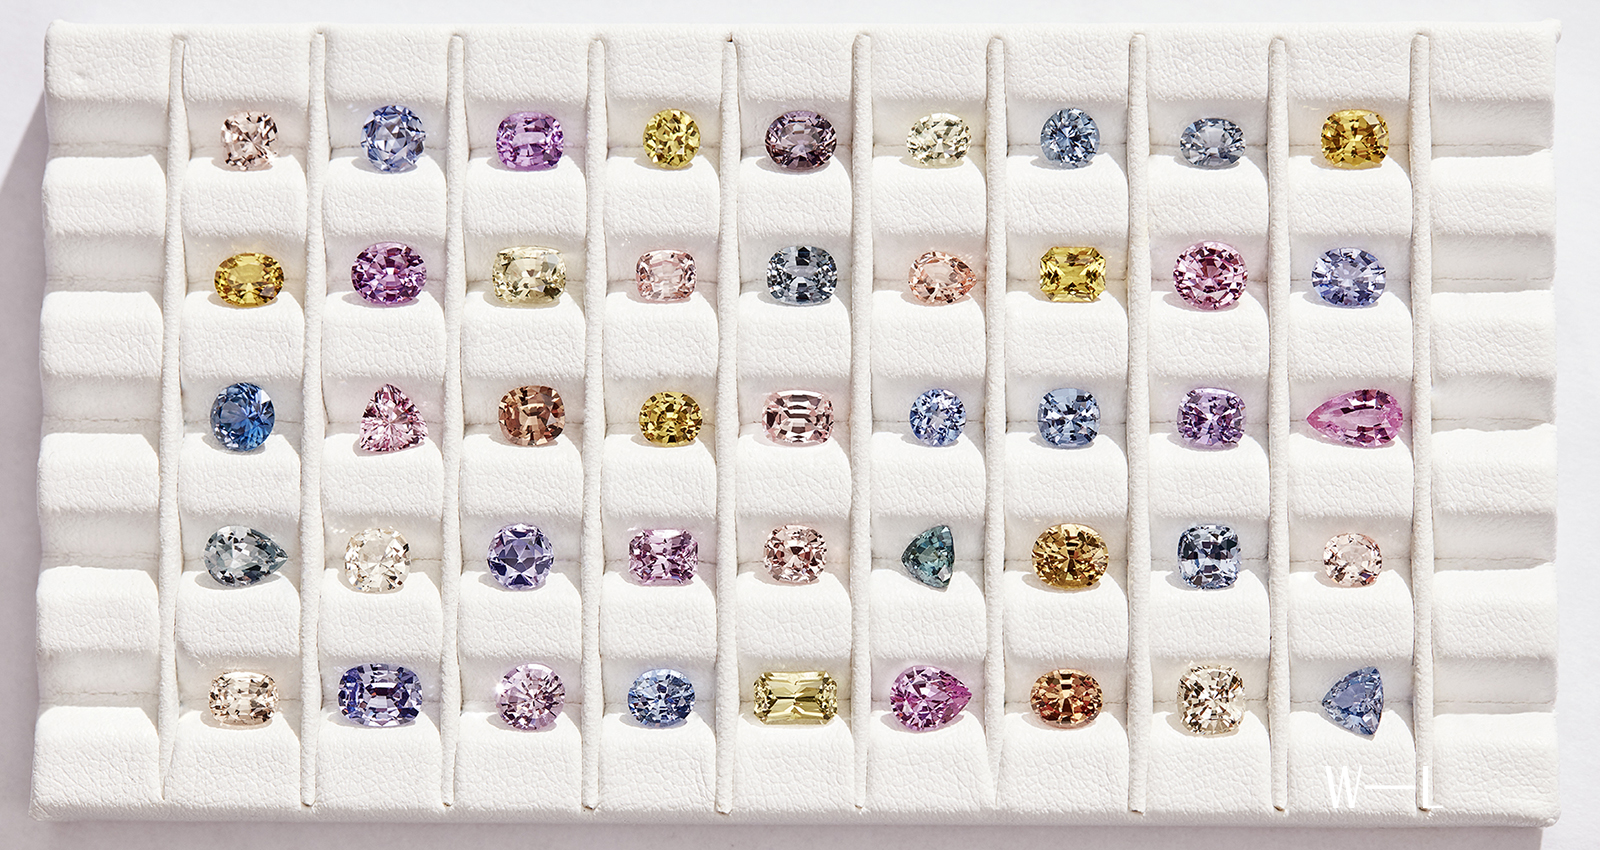 A Wennick–Lefèvre selection of unheated sapphires from Madagascar. Photography by Ture Andersen